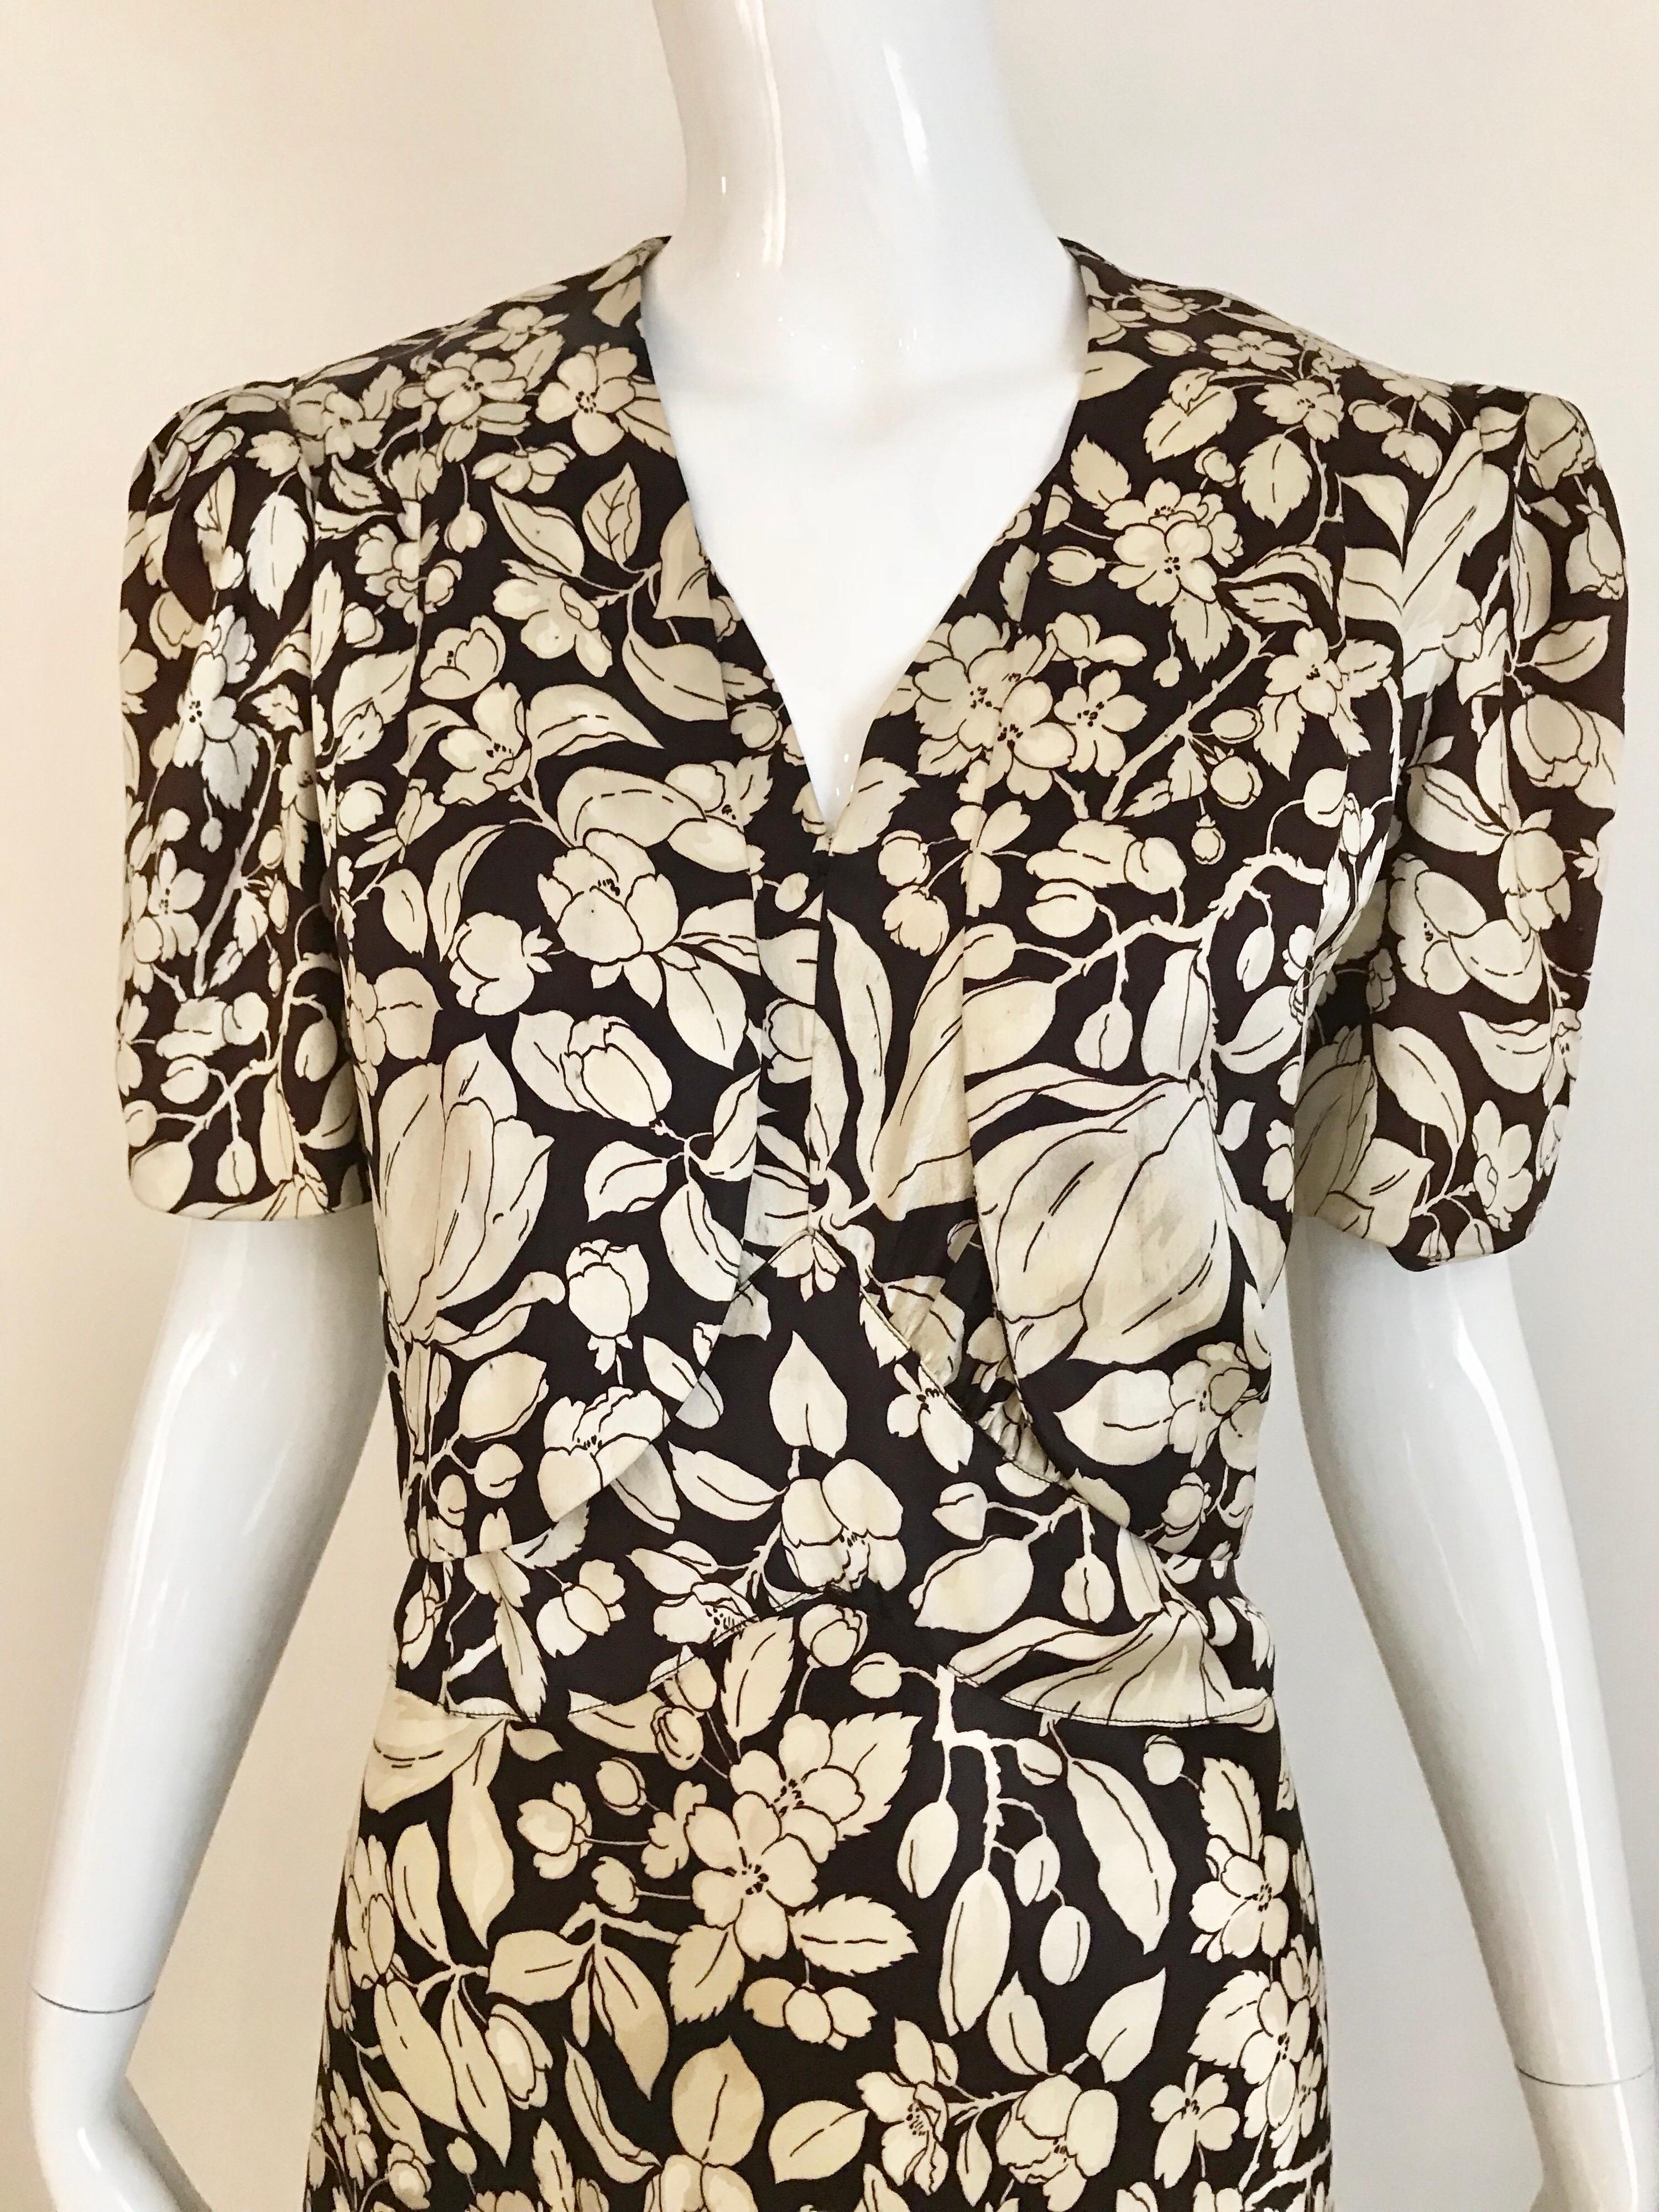 Charming 1930s Brown and white Floral print silk charmeuse gown with cropped jacket.
Perfect for wedding party.
Cropped Jacket measurement: Bust: 40 inches/ Waist: 36 inches
Gown: Bust: 40 inches/ Waist: 32 inches/ Dress length: 60 inches